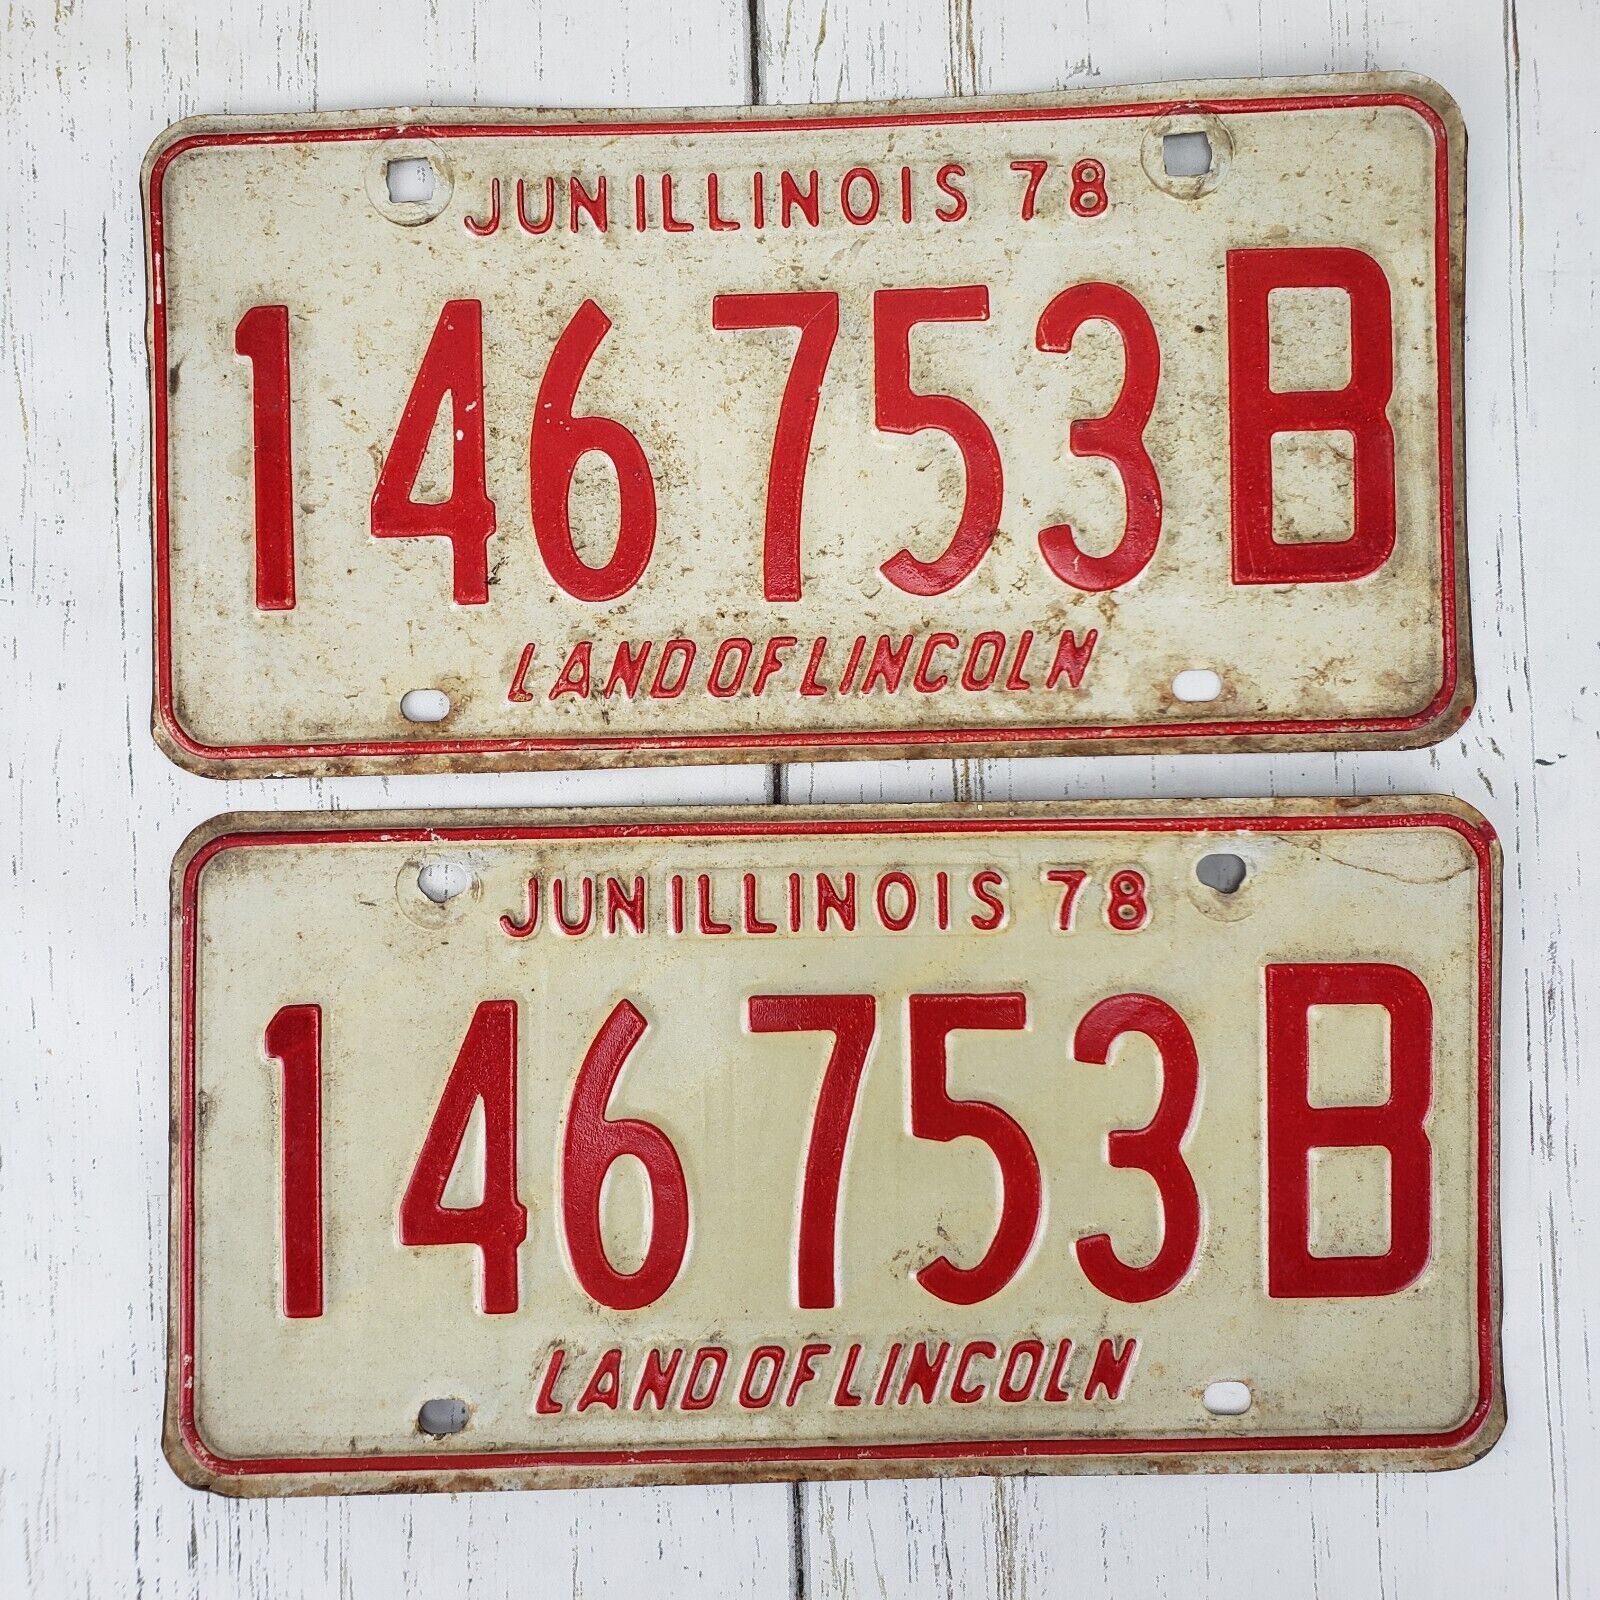 1978 Illinois Land of Lincoln License Plates Pair 146 753 B White Red